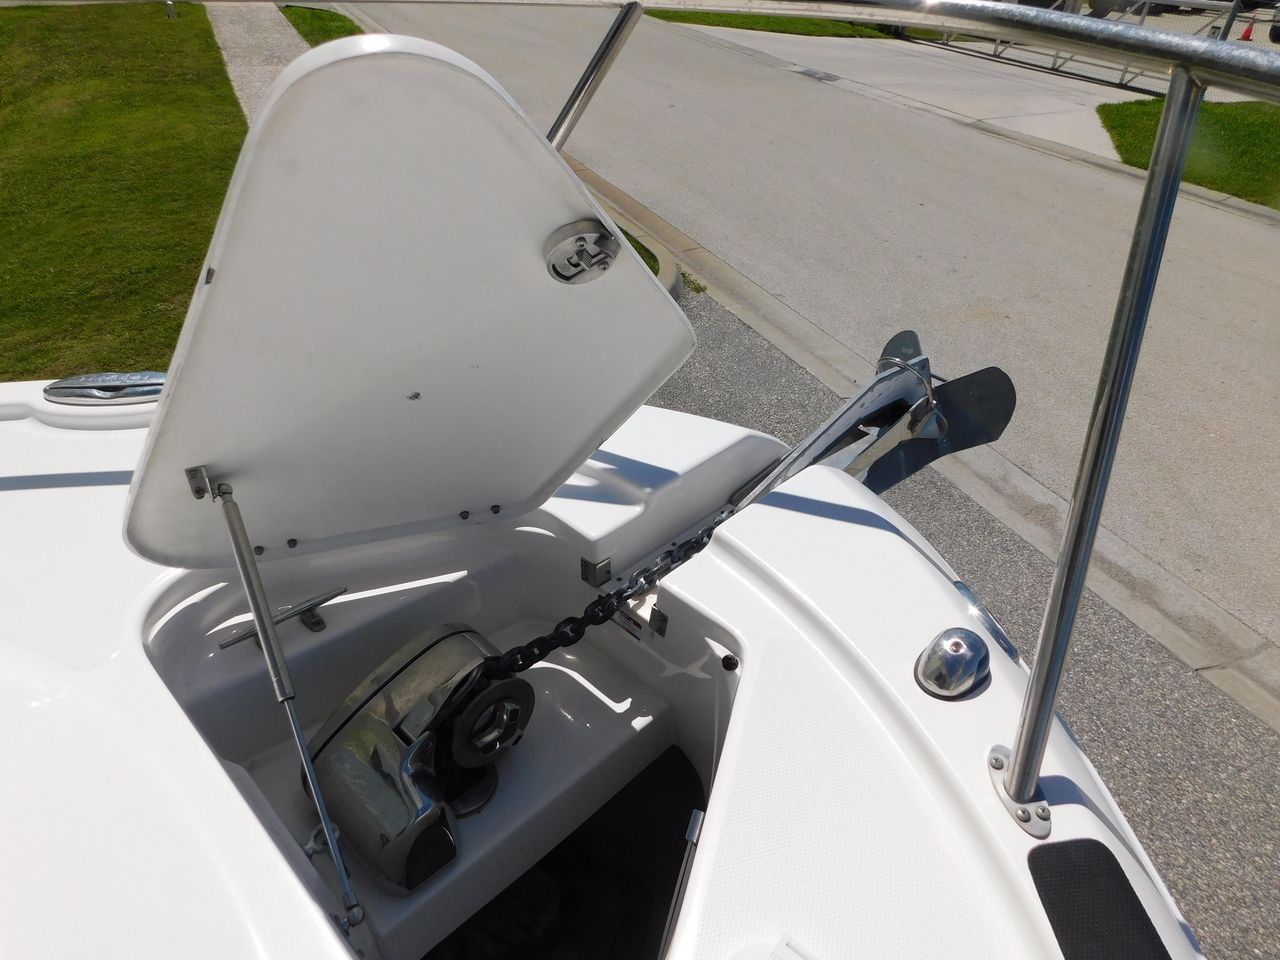 2014 Robalo R 305 wa Power boat for sale in Berlin Hts, OH - image 15 